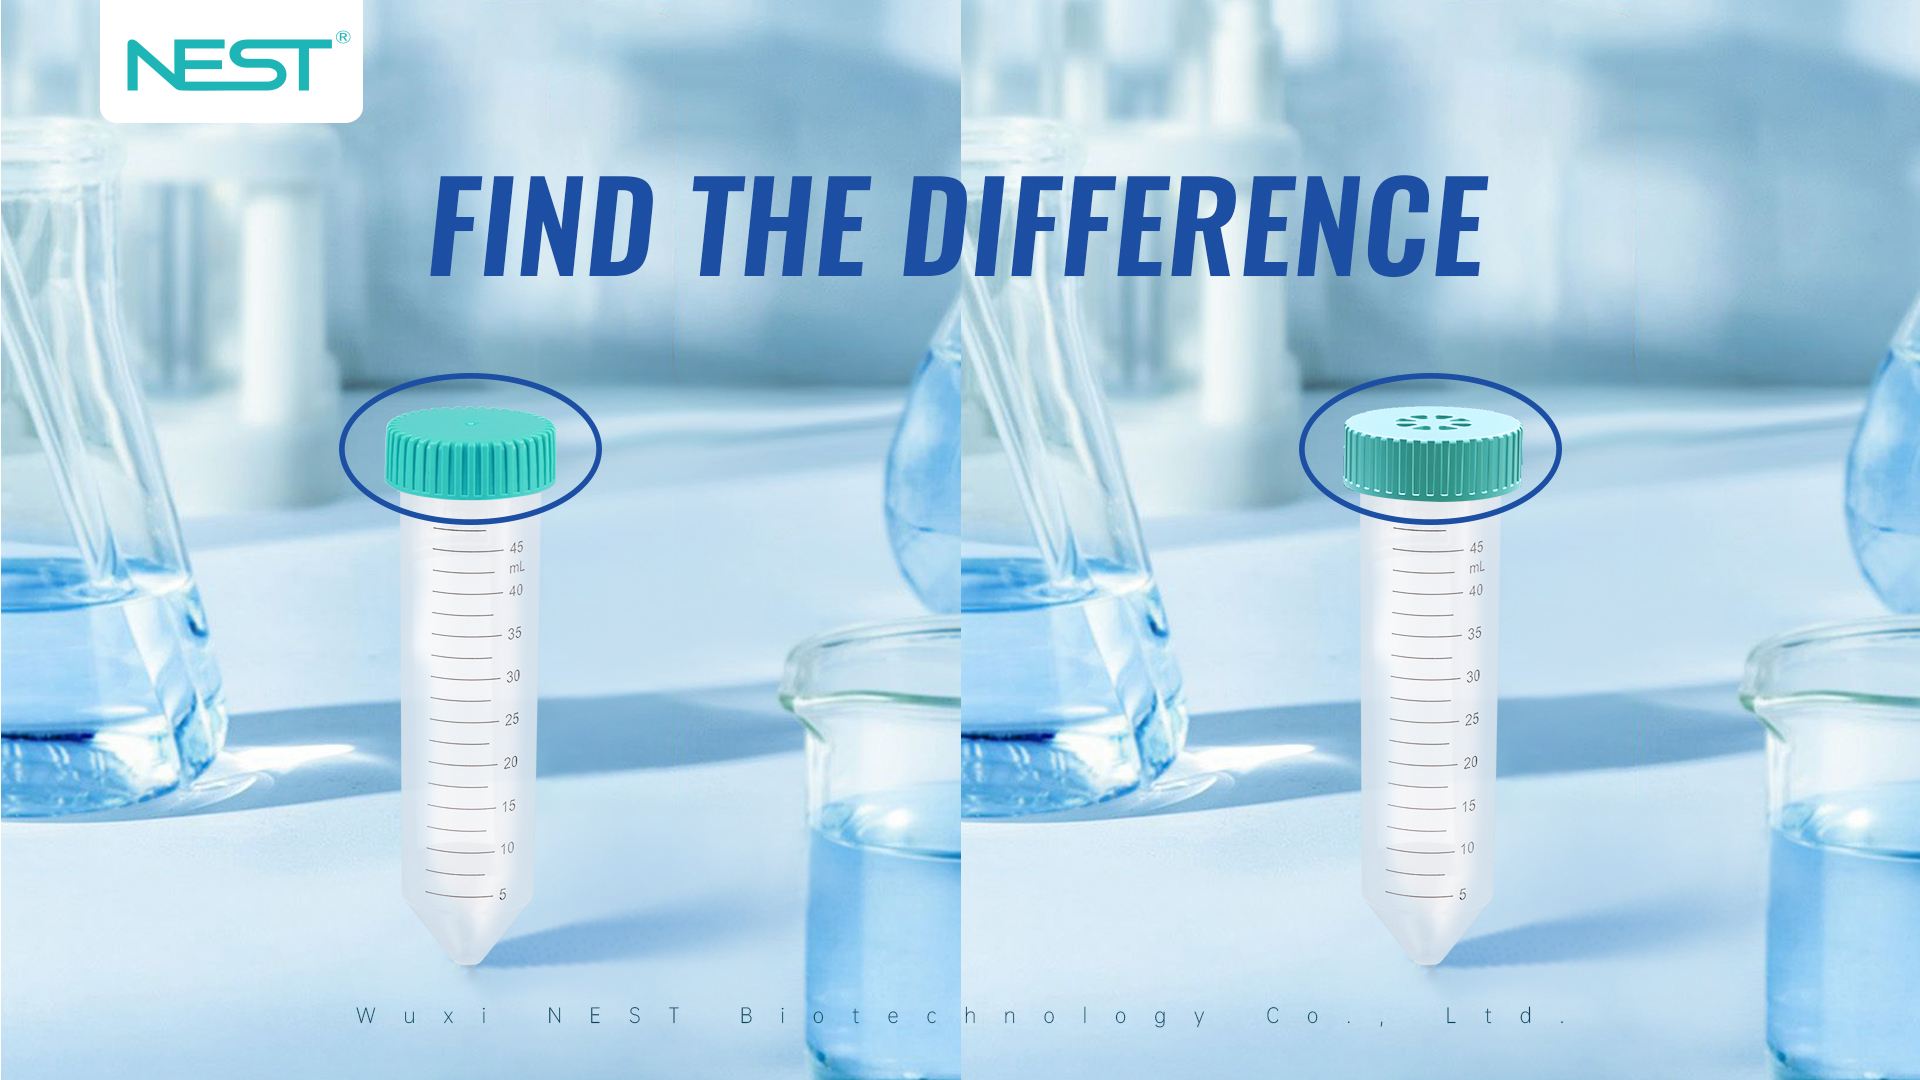 Find the difference: Min Bioreactor or Centrifuge Tube?